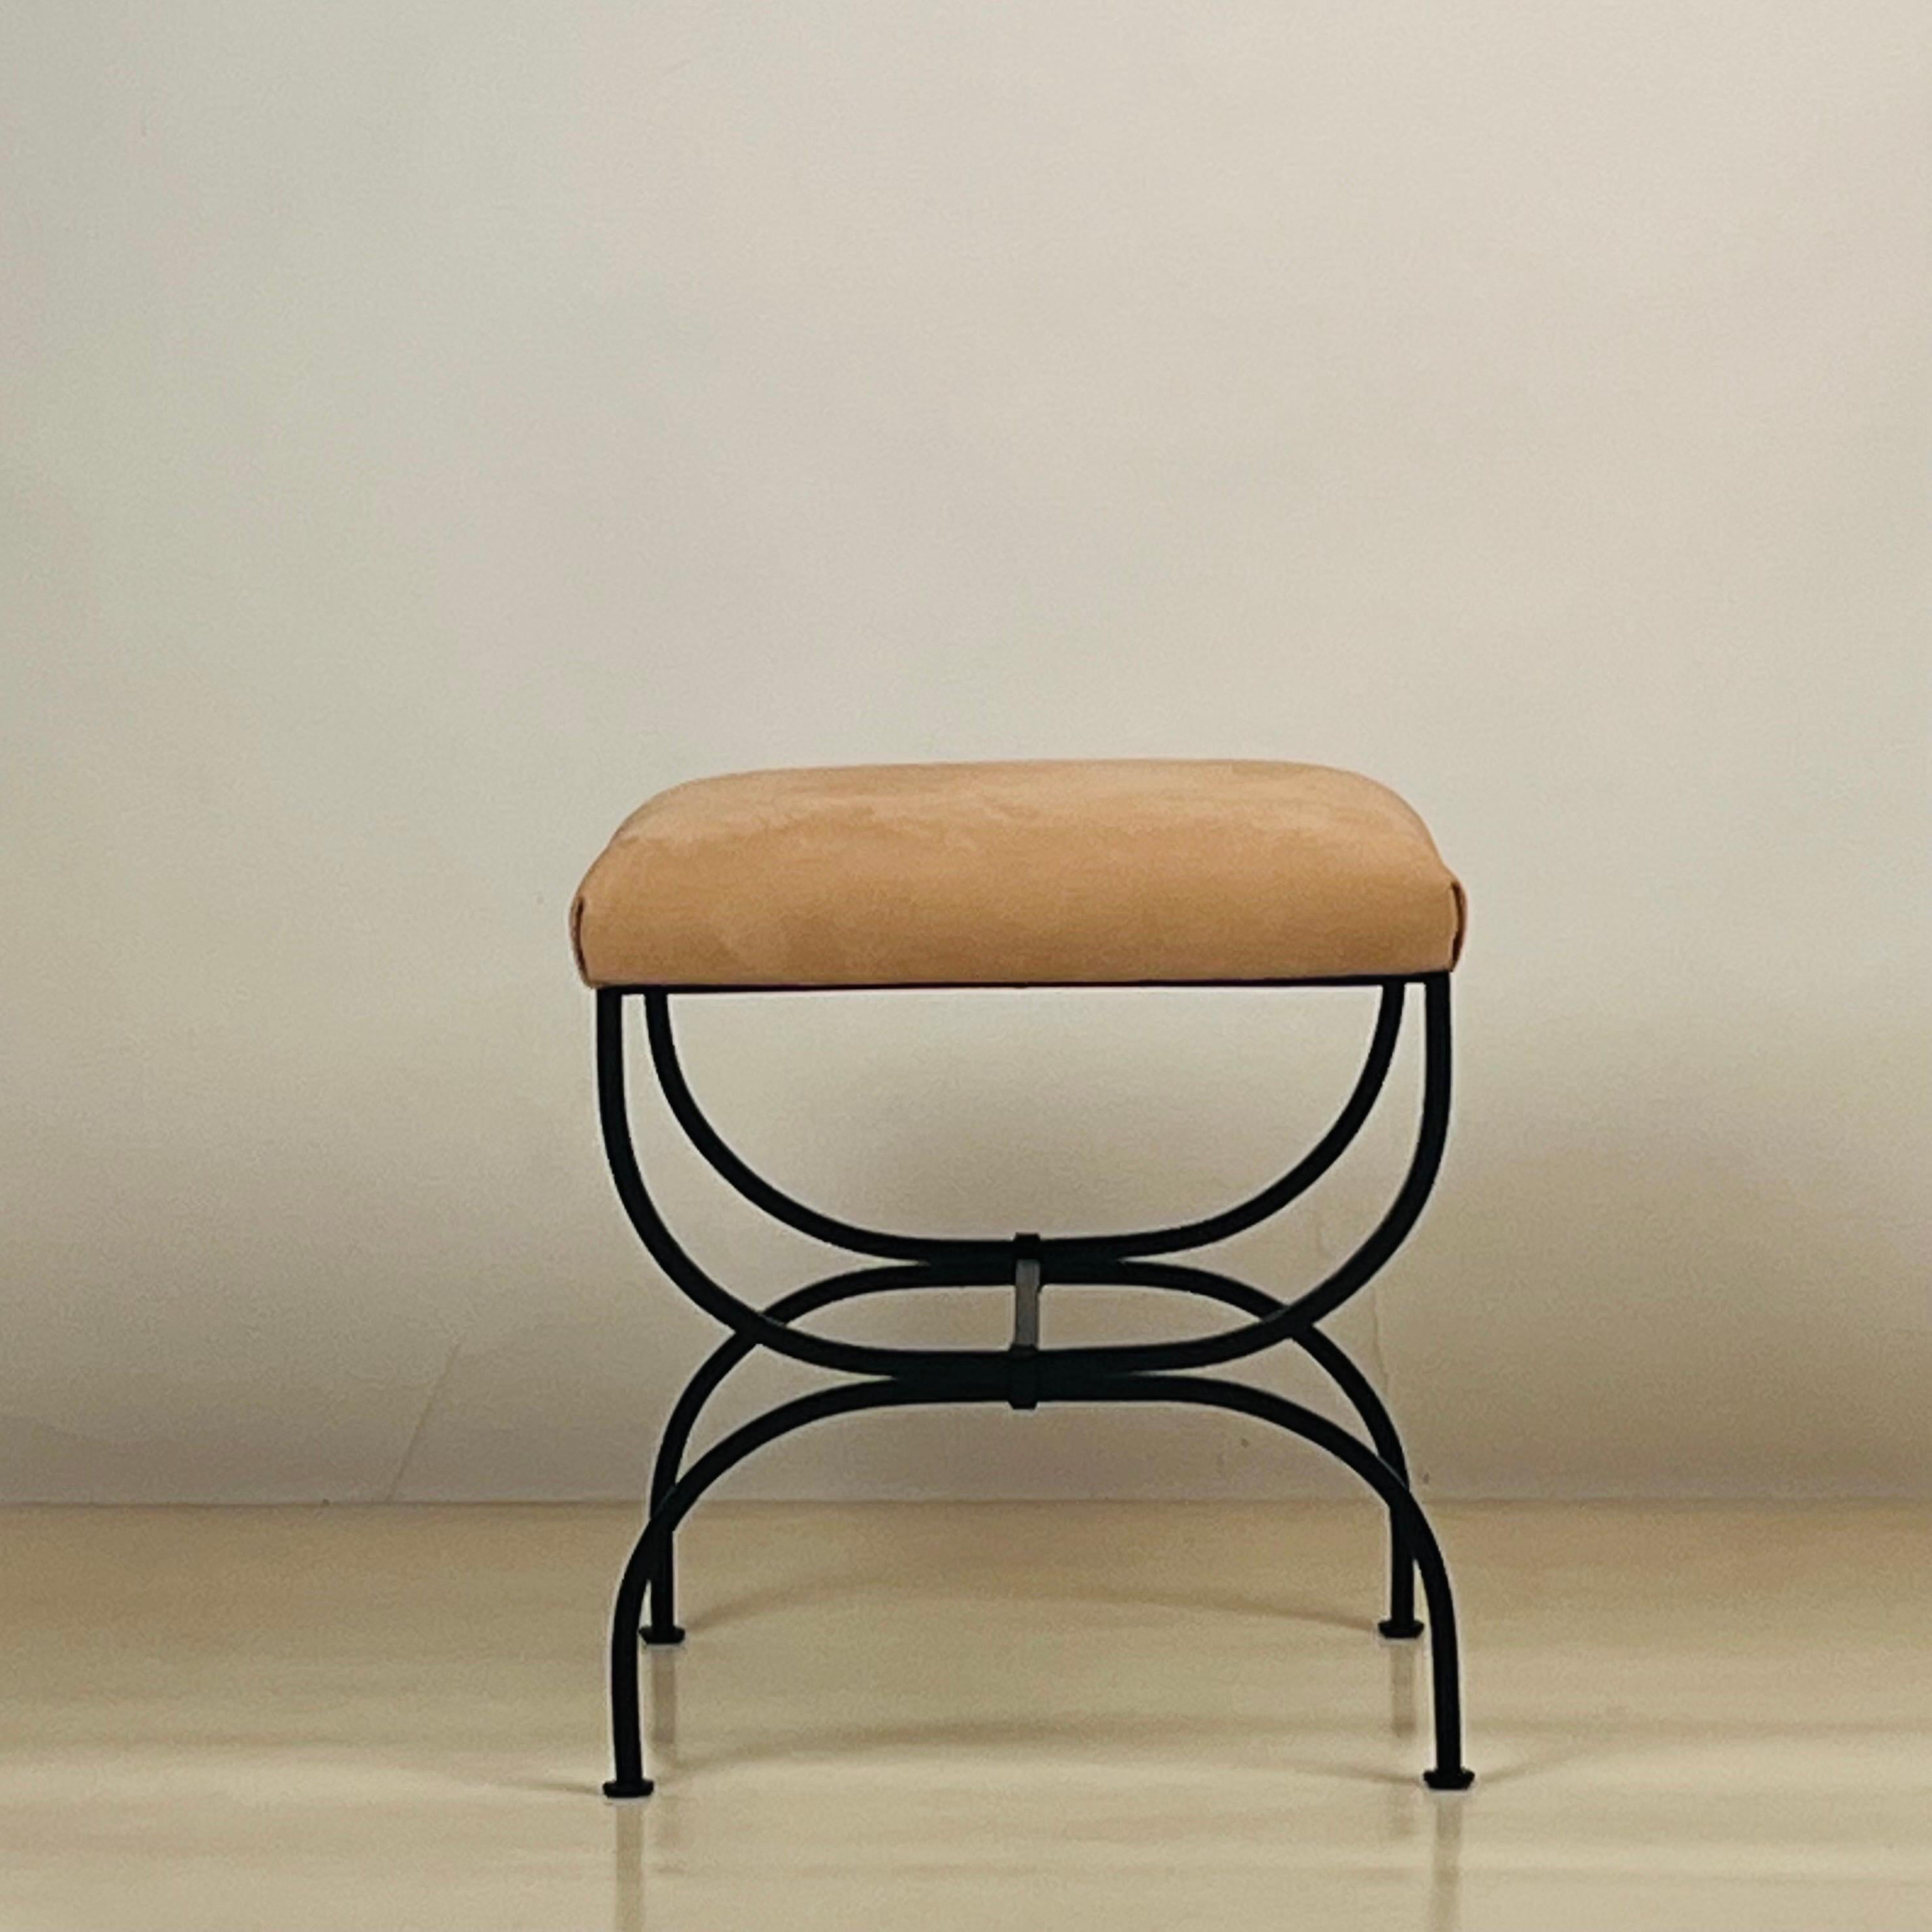 French Pair of 'Strapontin' Stools in Cognac Nubuck Leather by Design Frères For Sale